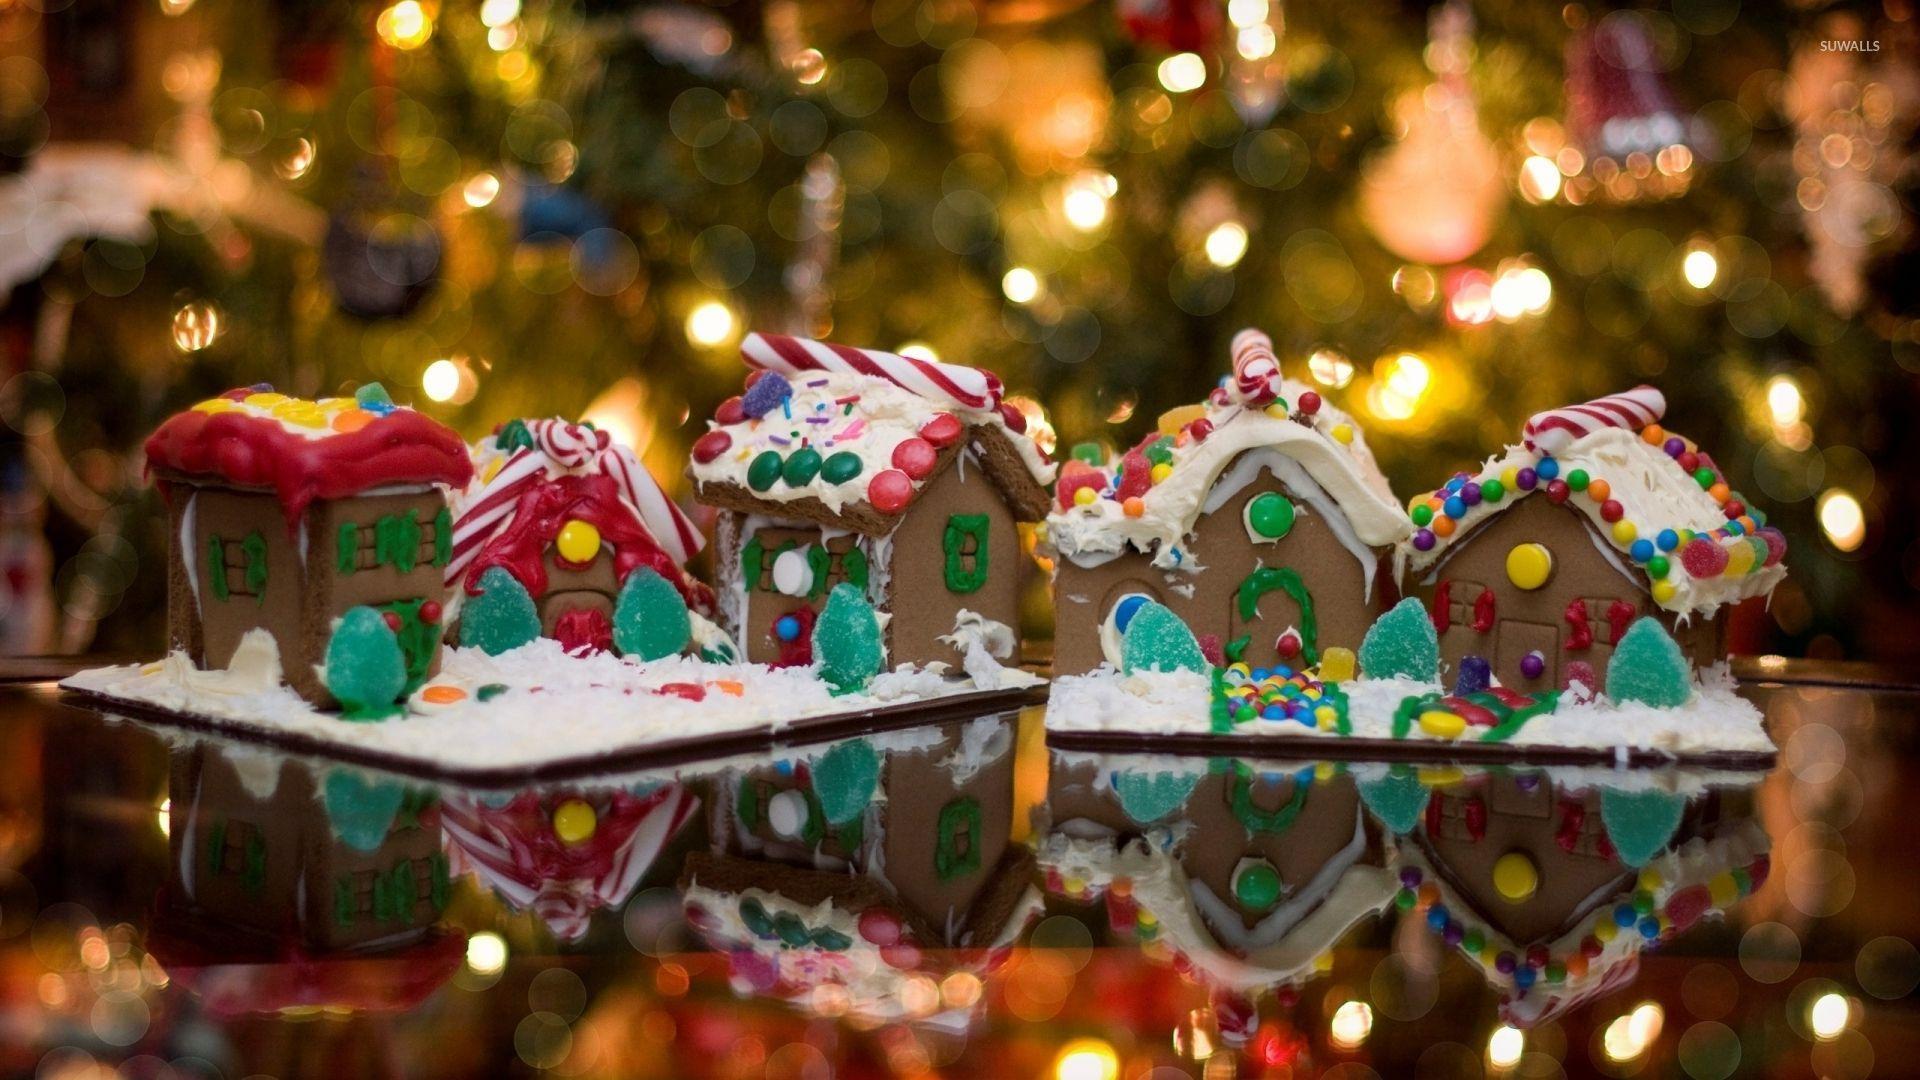 Gingerbread houses in front of the Christmas tree wallpaper wallpaper